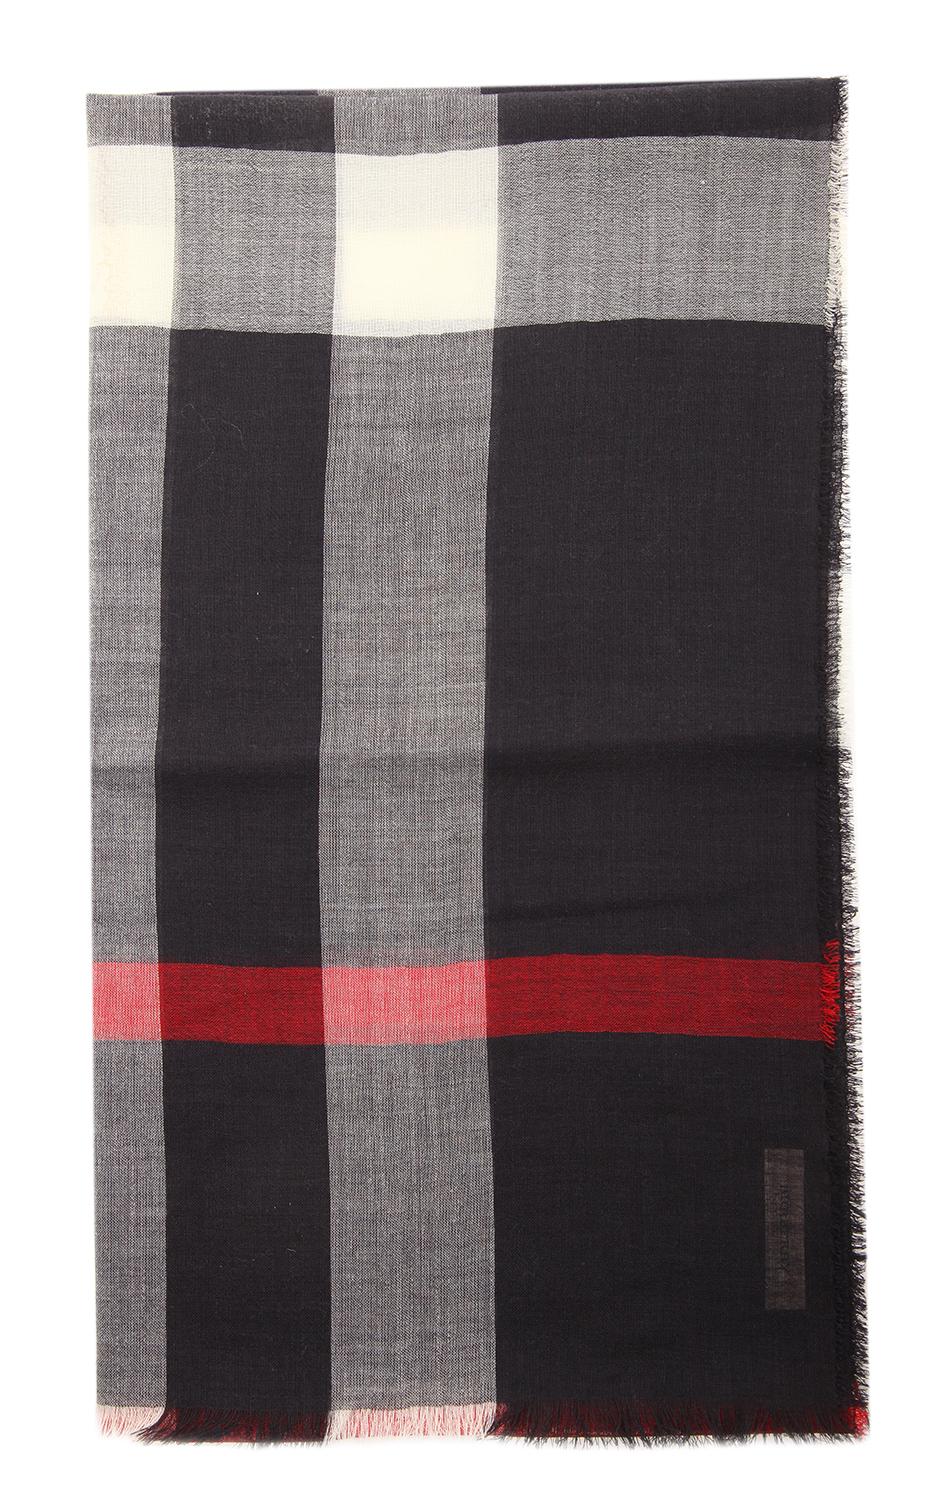 Item number 38620661
Measurements length: 180 cm, width: 50 cm 
Color navy-red-white
Material 51% wool, 49% silk
Washing Specialist dry clean
Weight in grams approx. 45
Check Lightweight Scarf